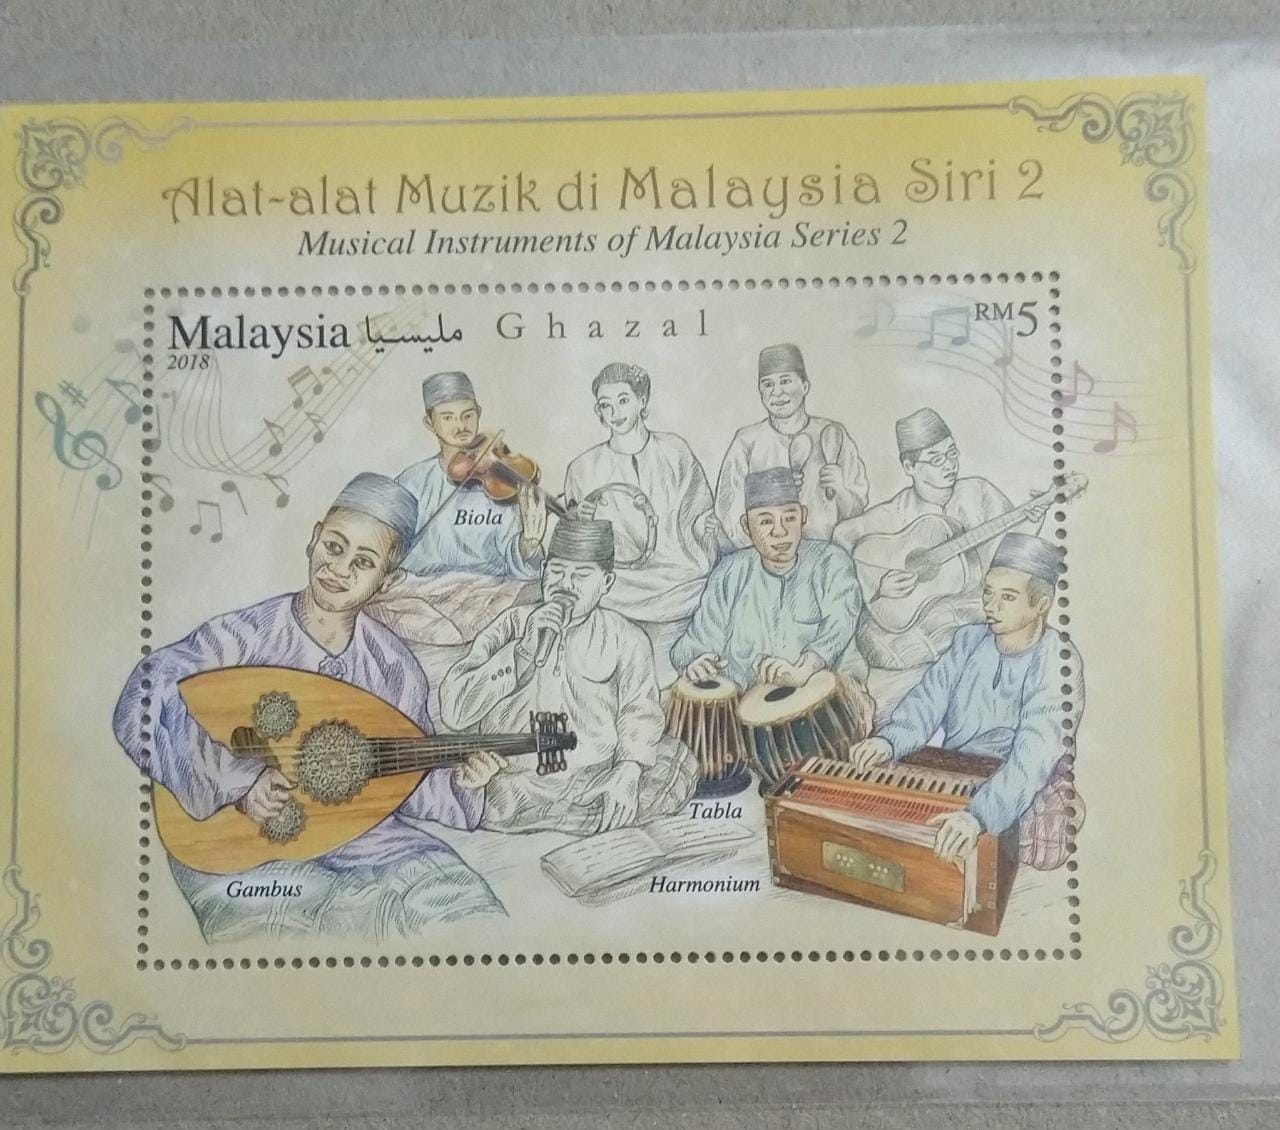 Malaysia stamp showing various musical instruments and  Ghazal singers.